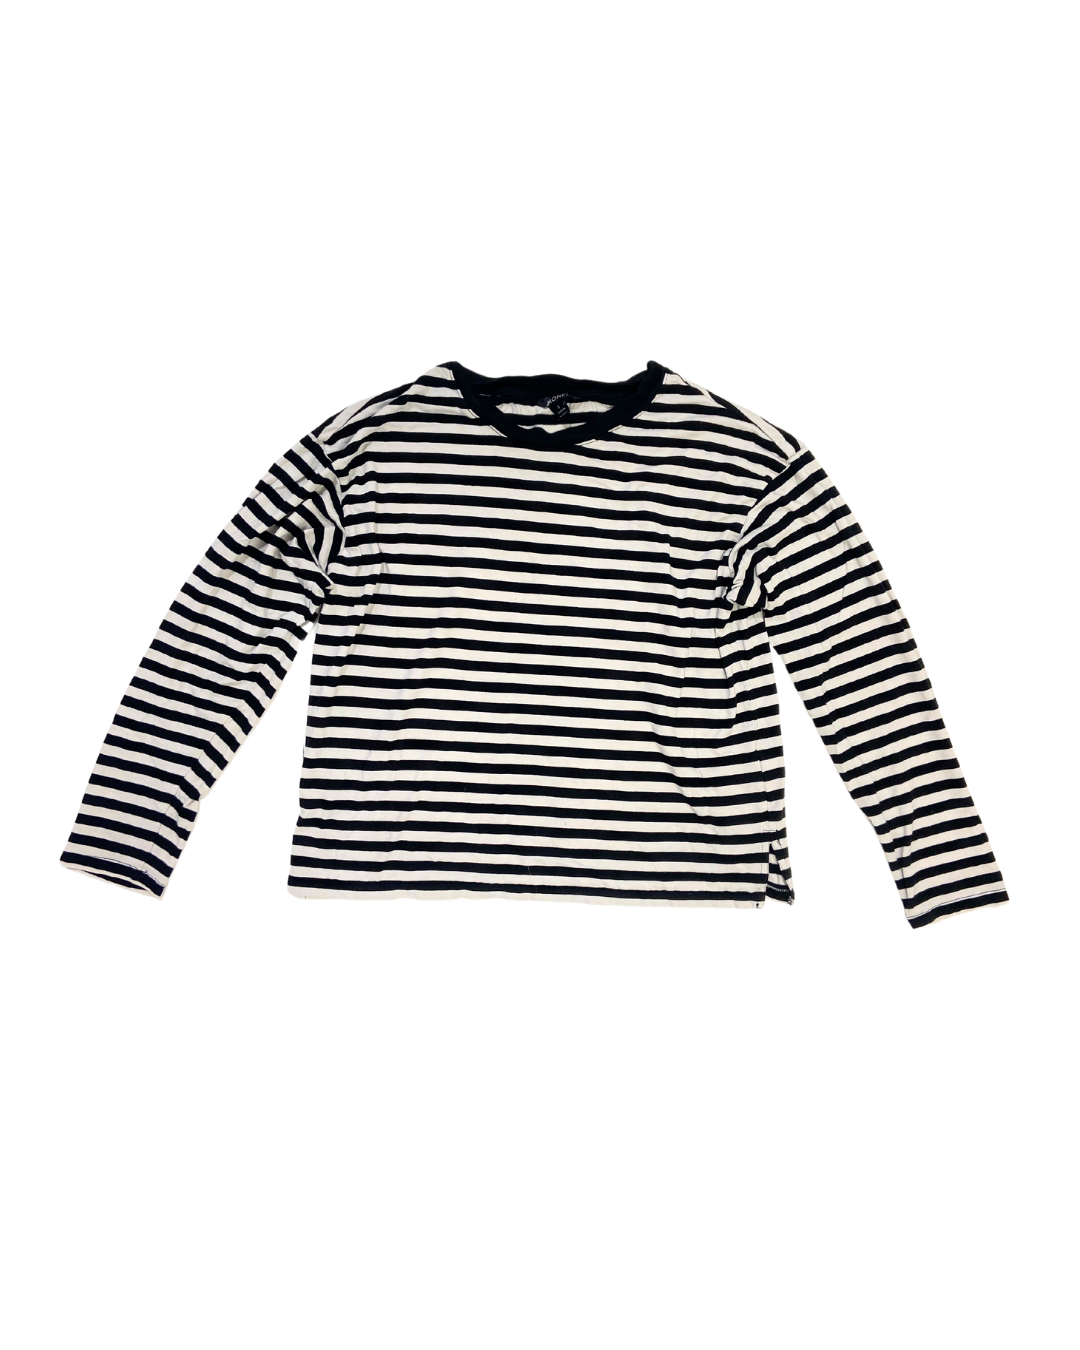 Monki Black and White Striped Long-Sleeve Top